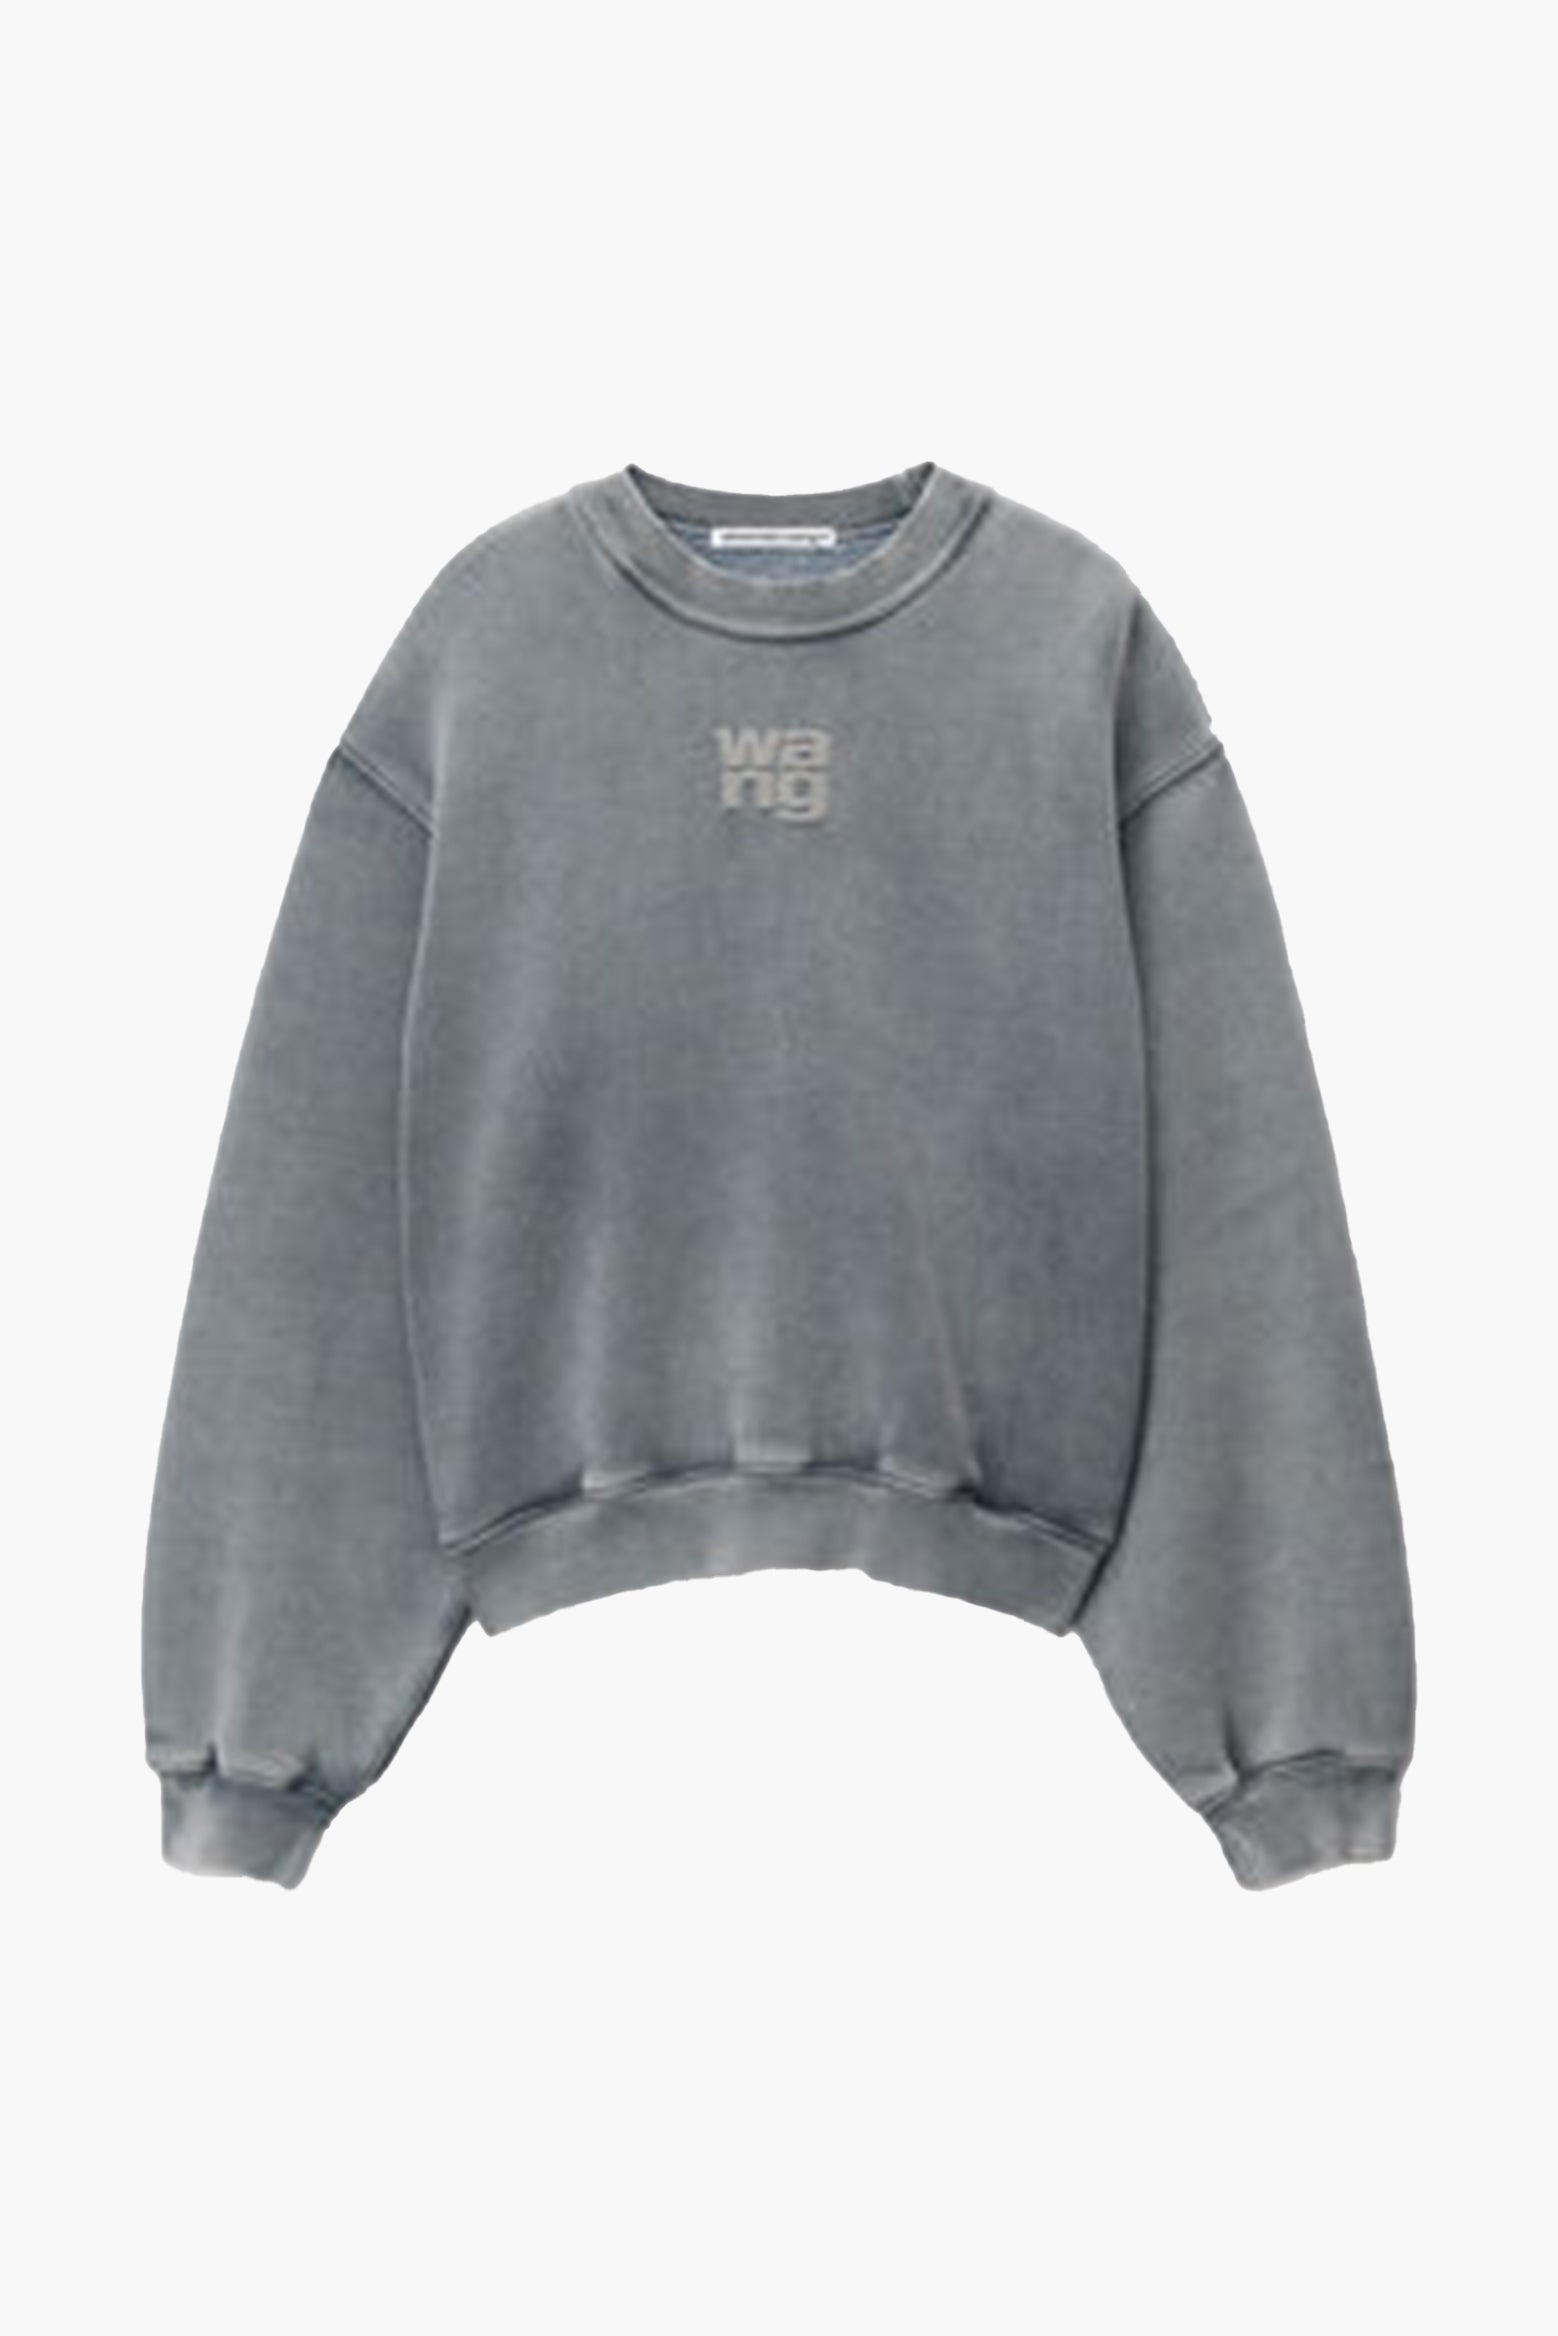 The Alexander Wang Essential Terry Crew Sweatshirt in Acid Fog available at The New Trend.